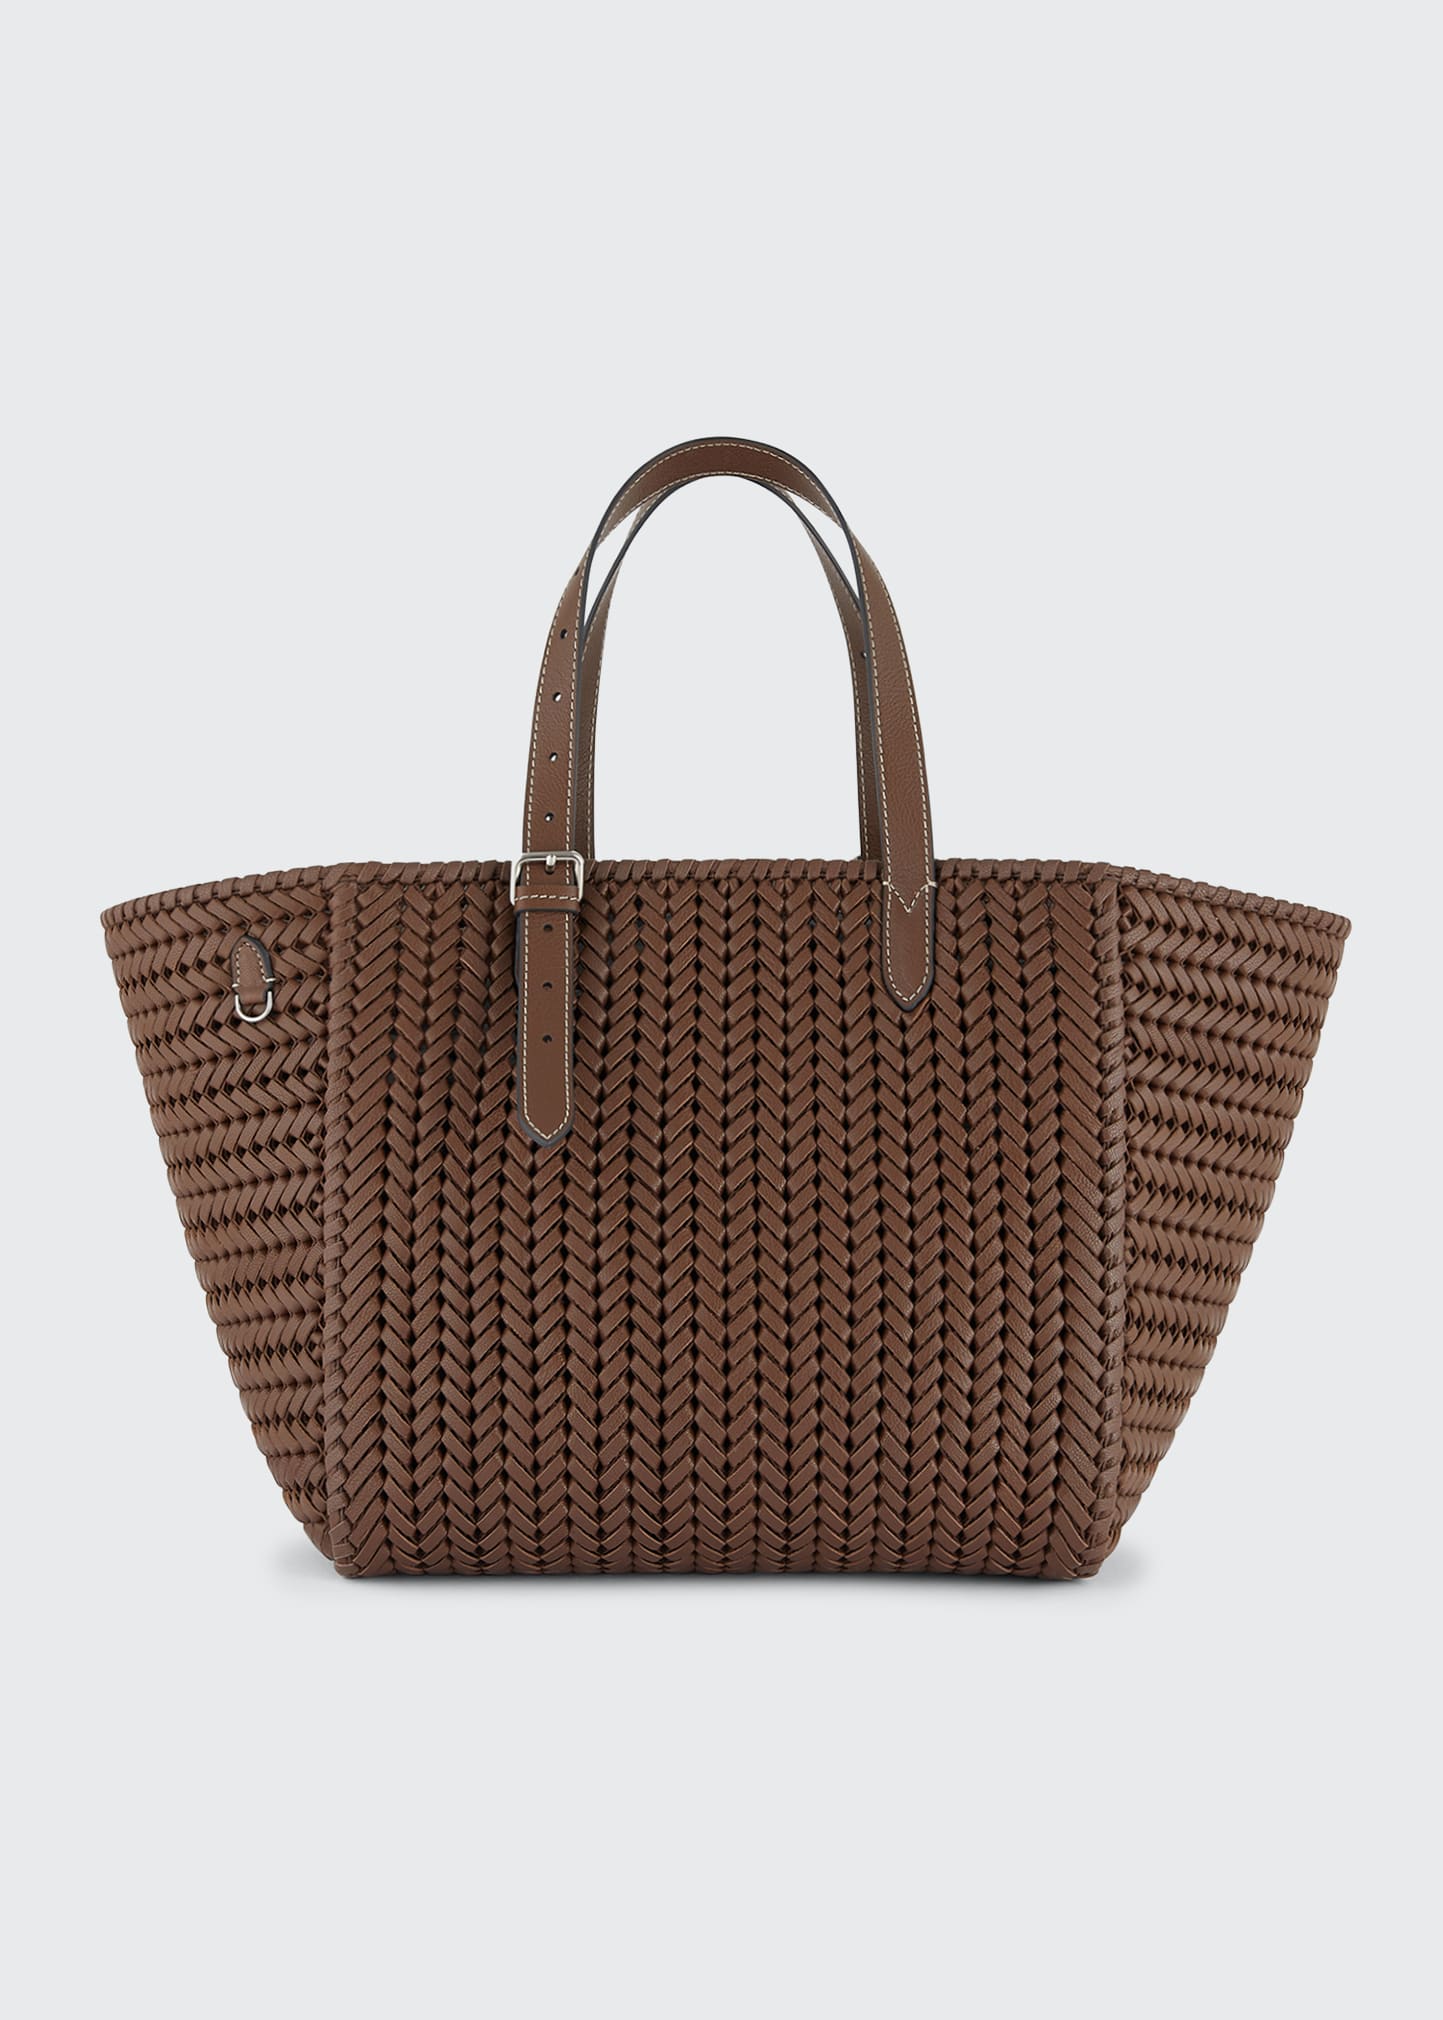 Anya Hindmarch The Neeson Woven Leather Tote Bag In Vole | ModeSens